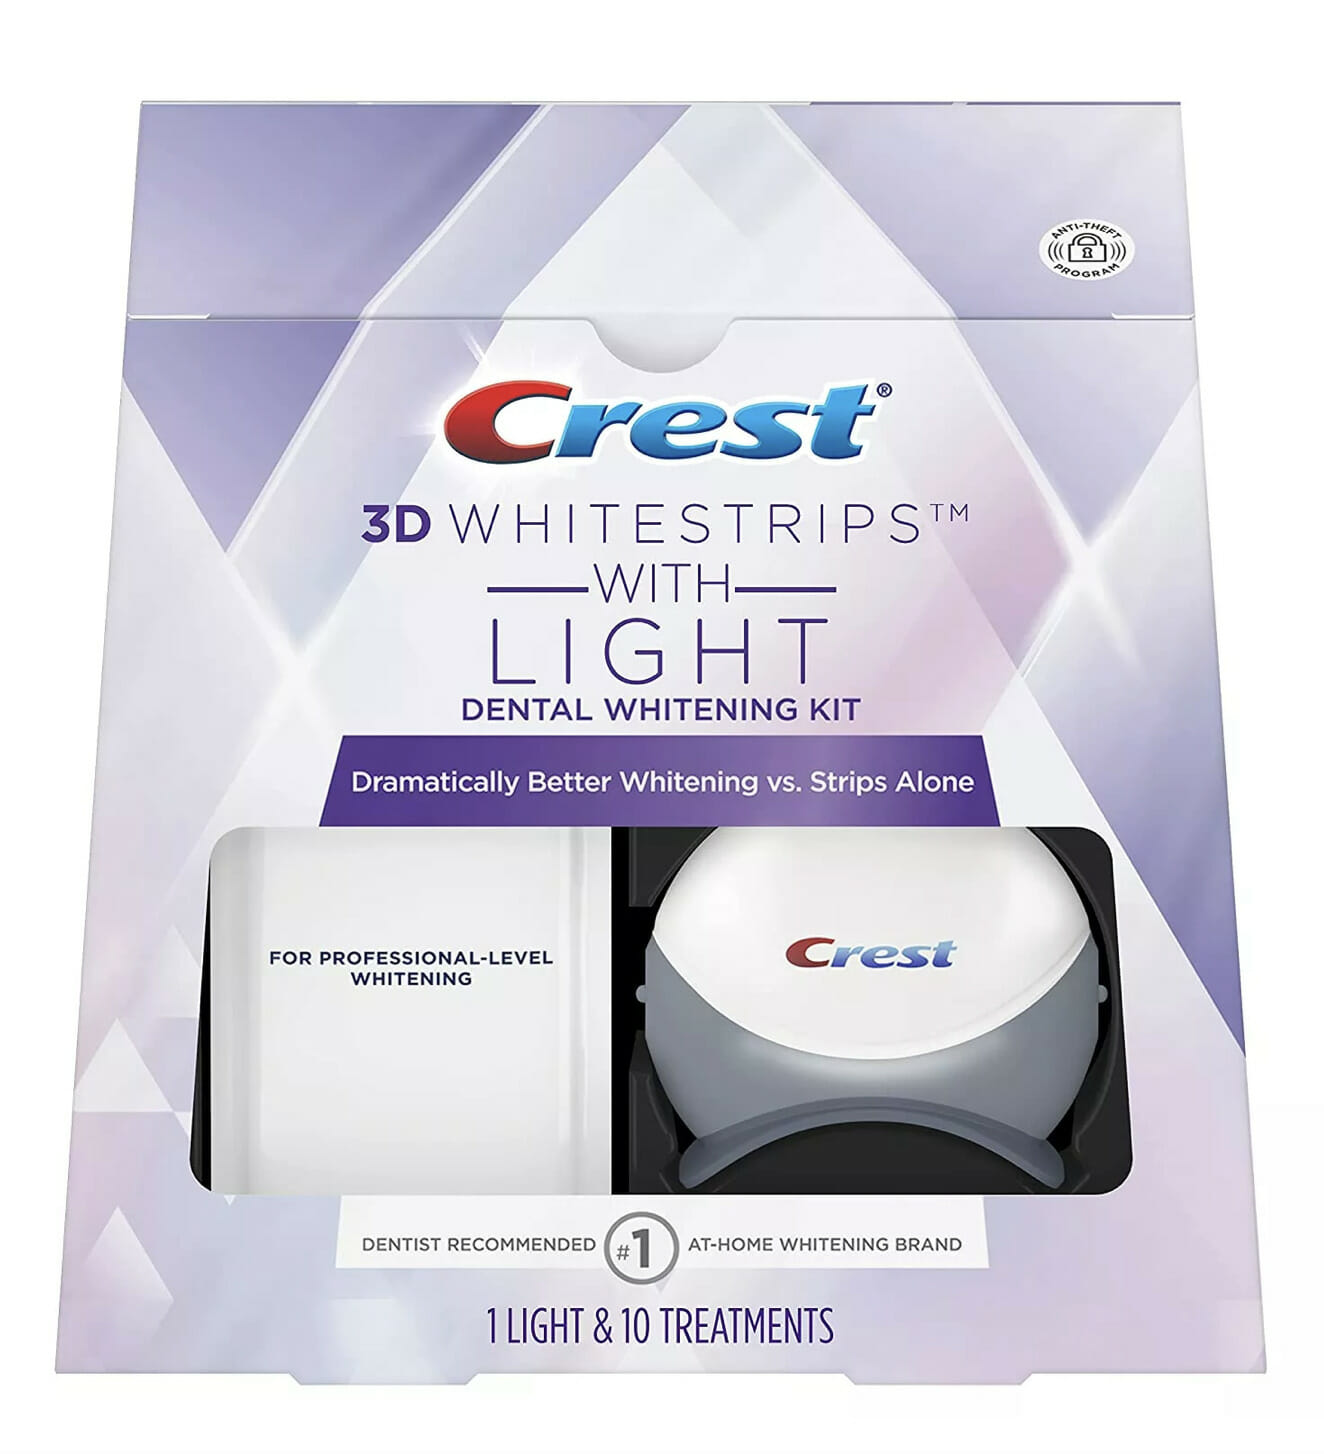 The Ultimate Guide to Achieving Pearly Whites with Crest Teeth Whitening Kits | Article Terrain